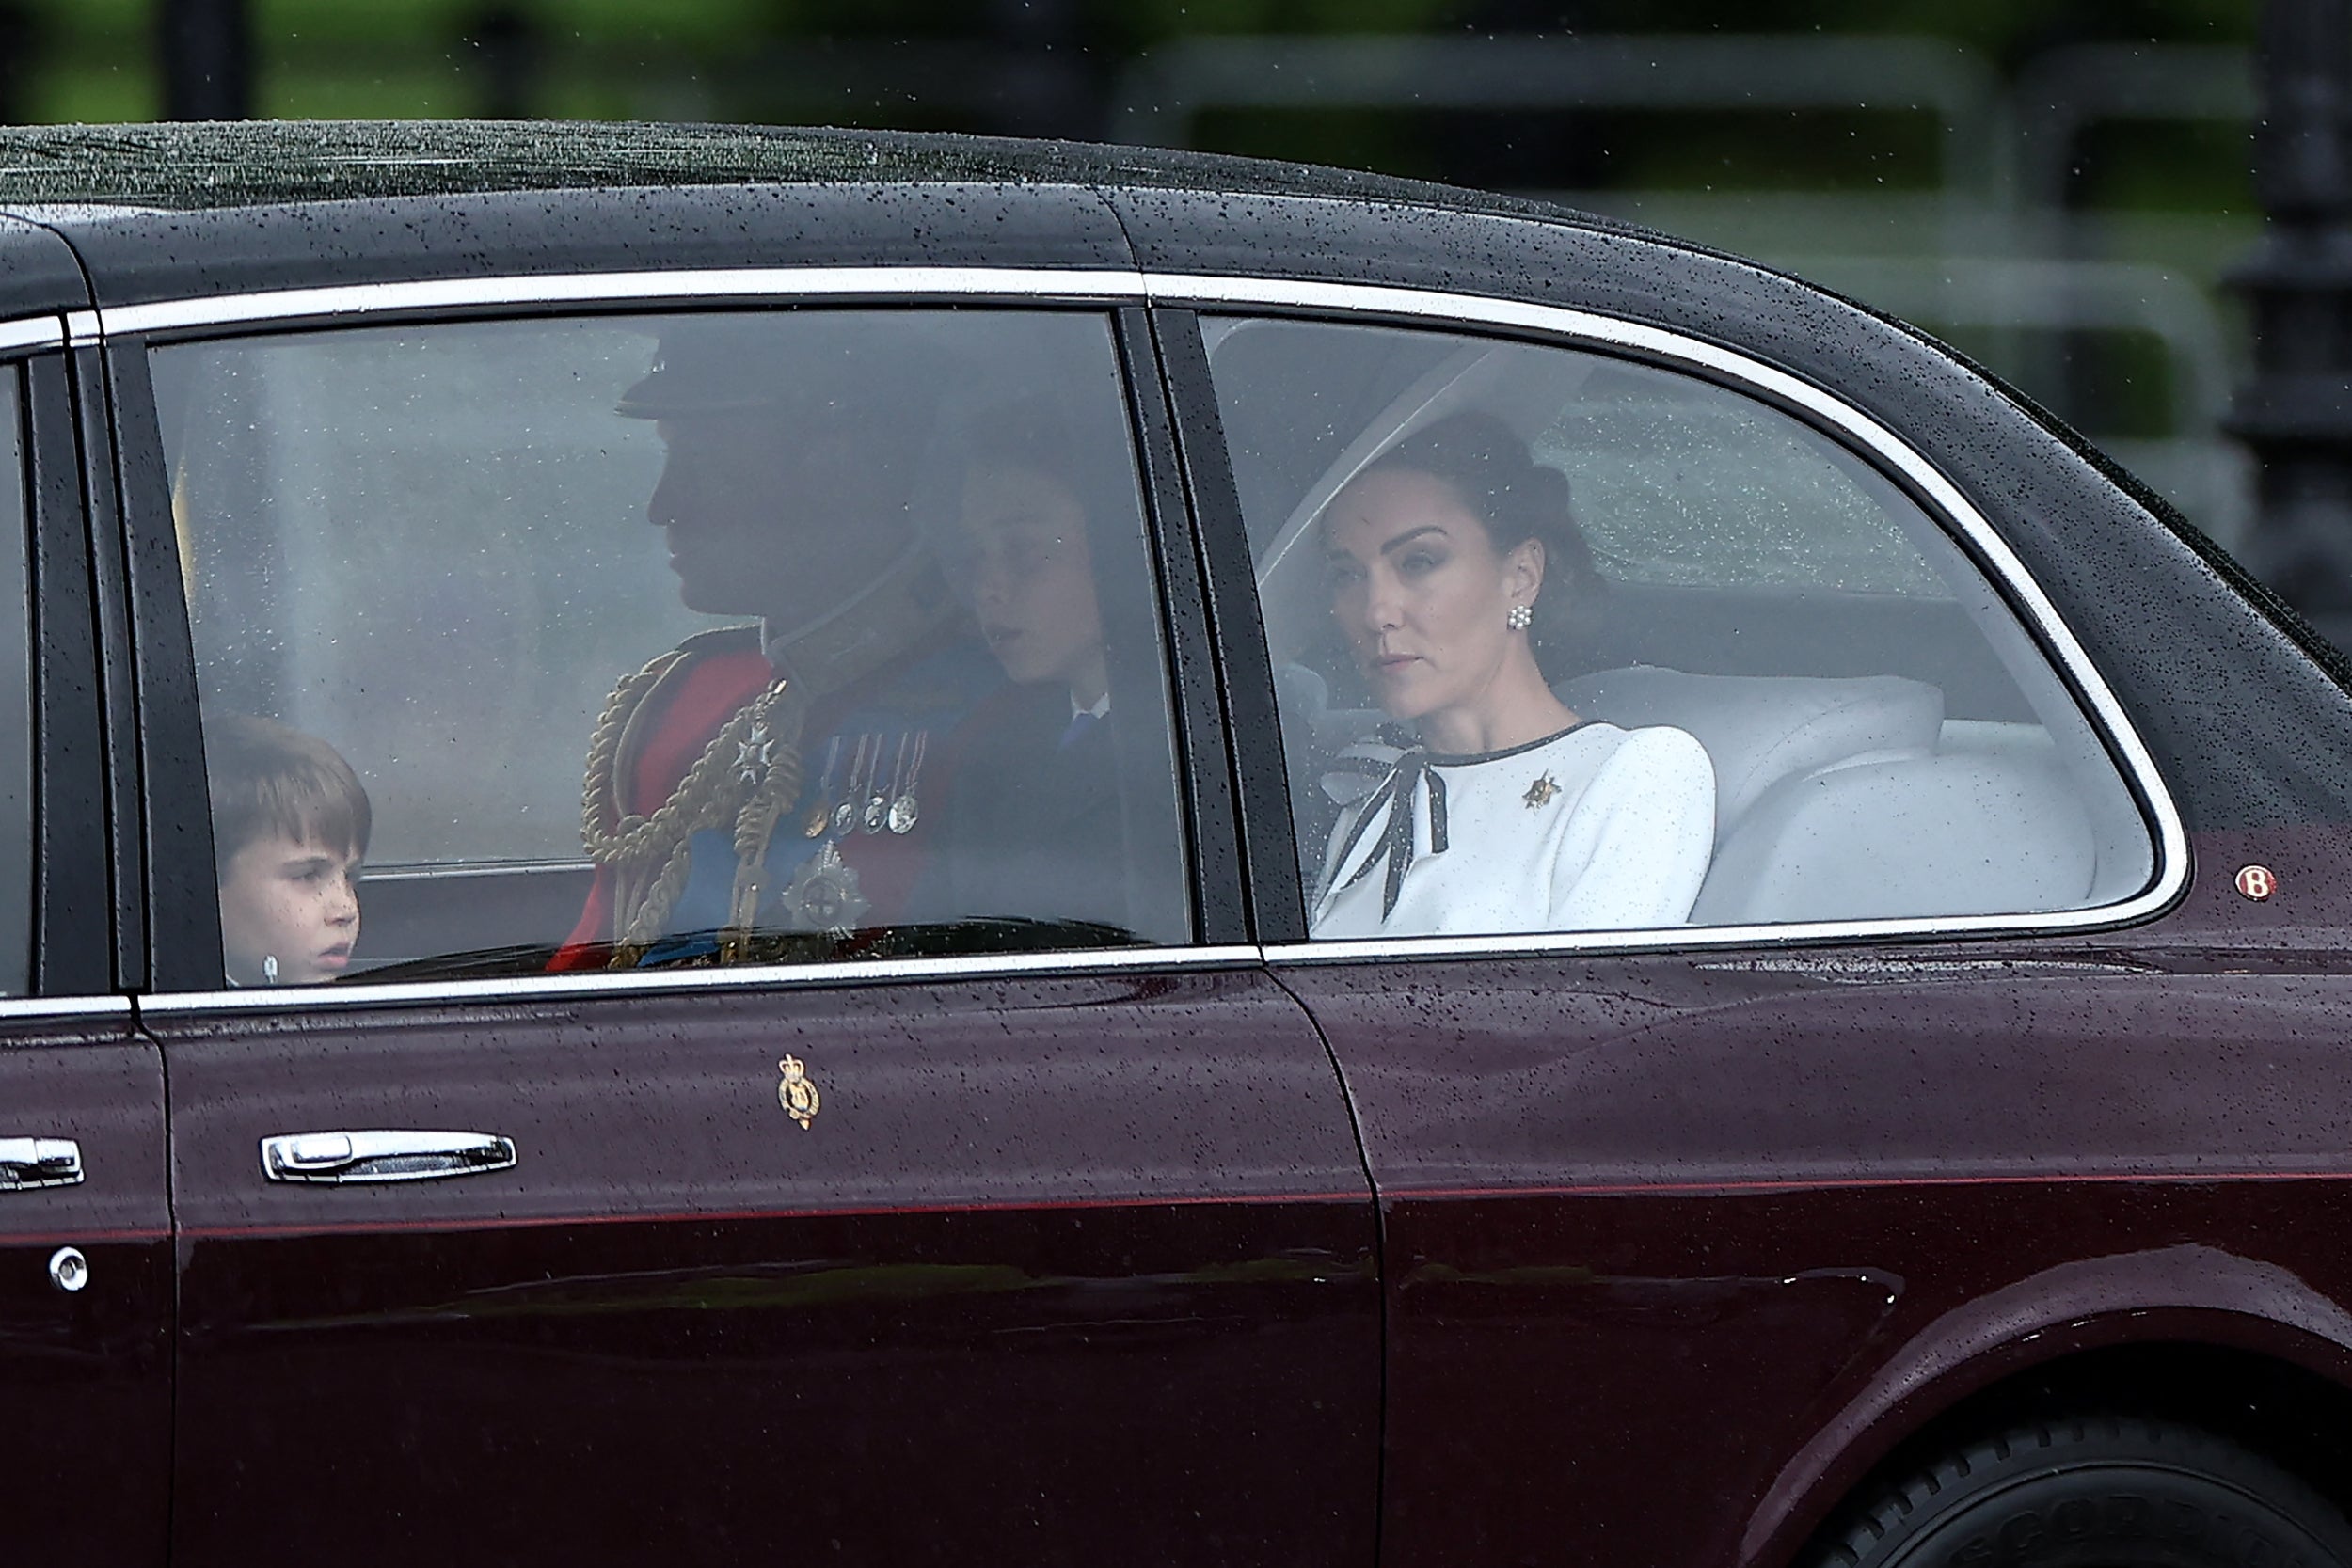 Kate first seen arriving at Buckingham Palace